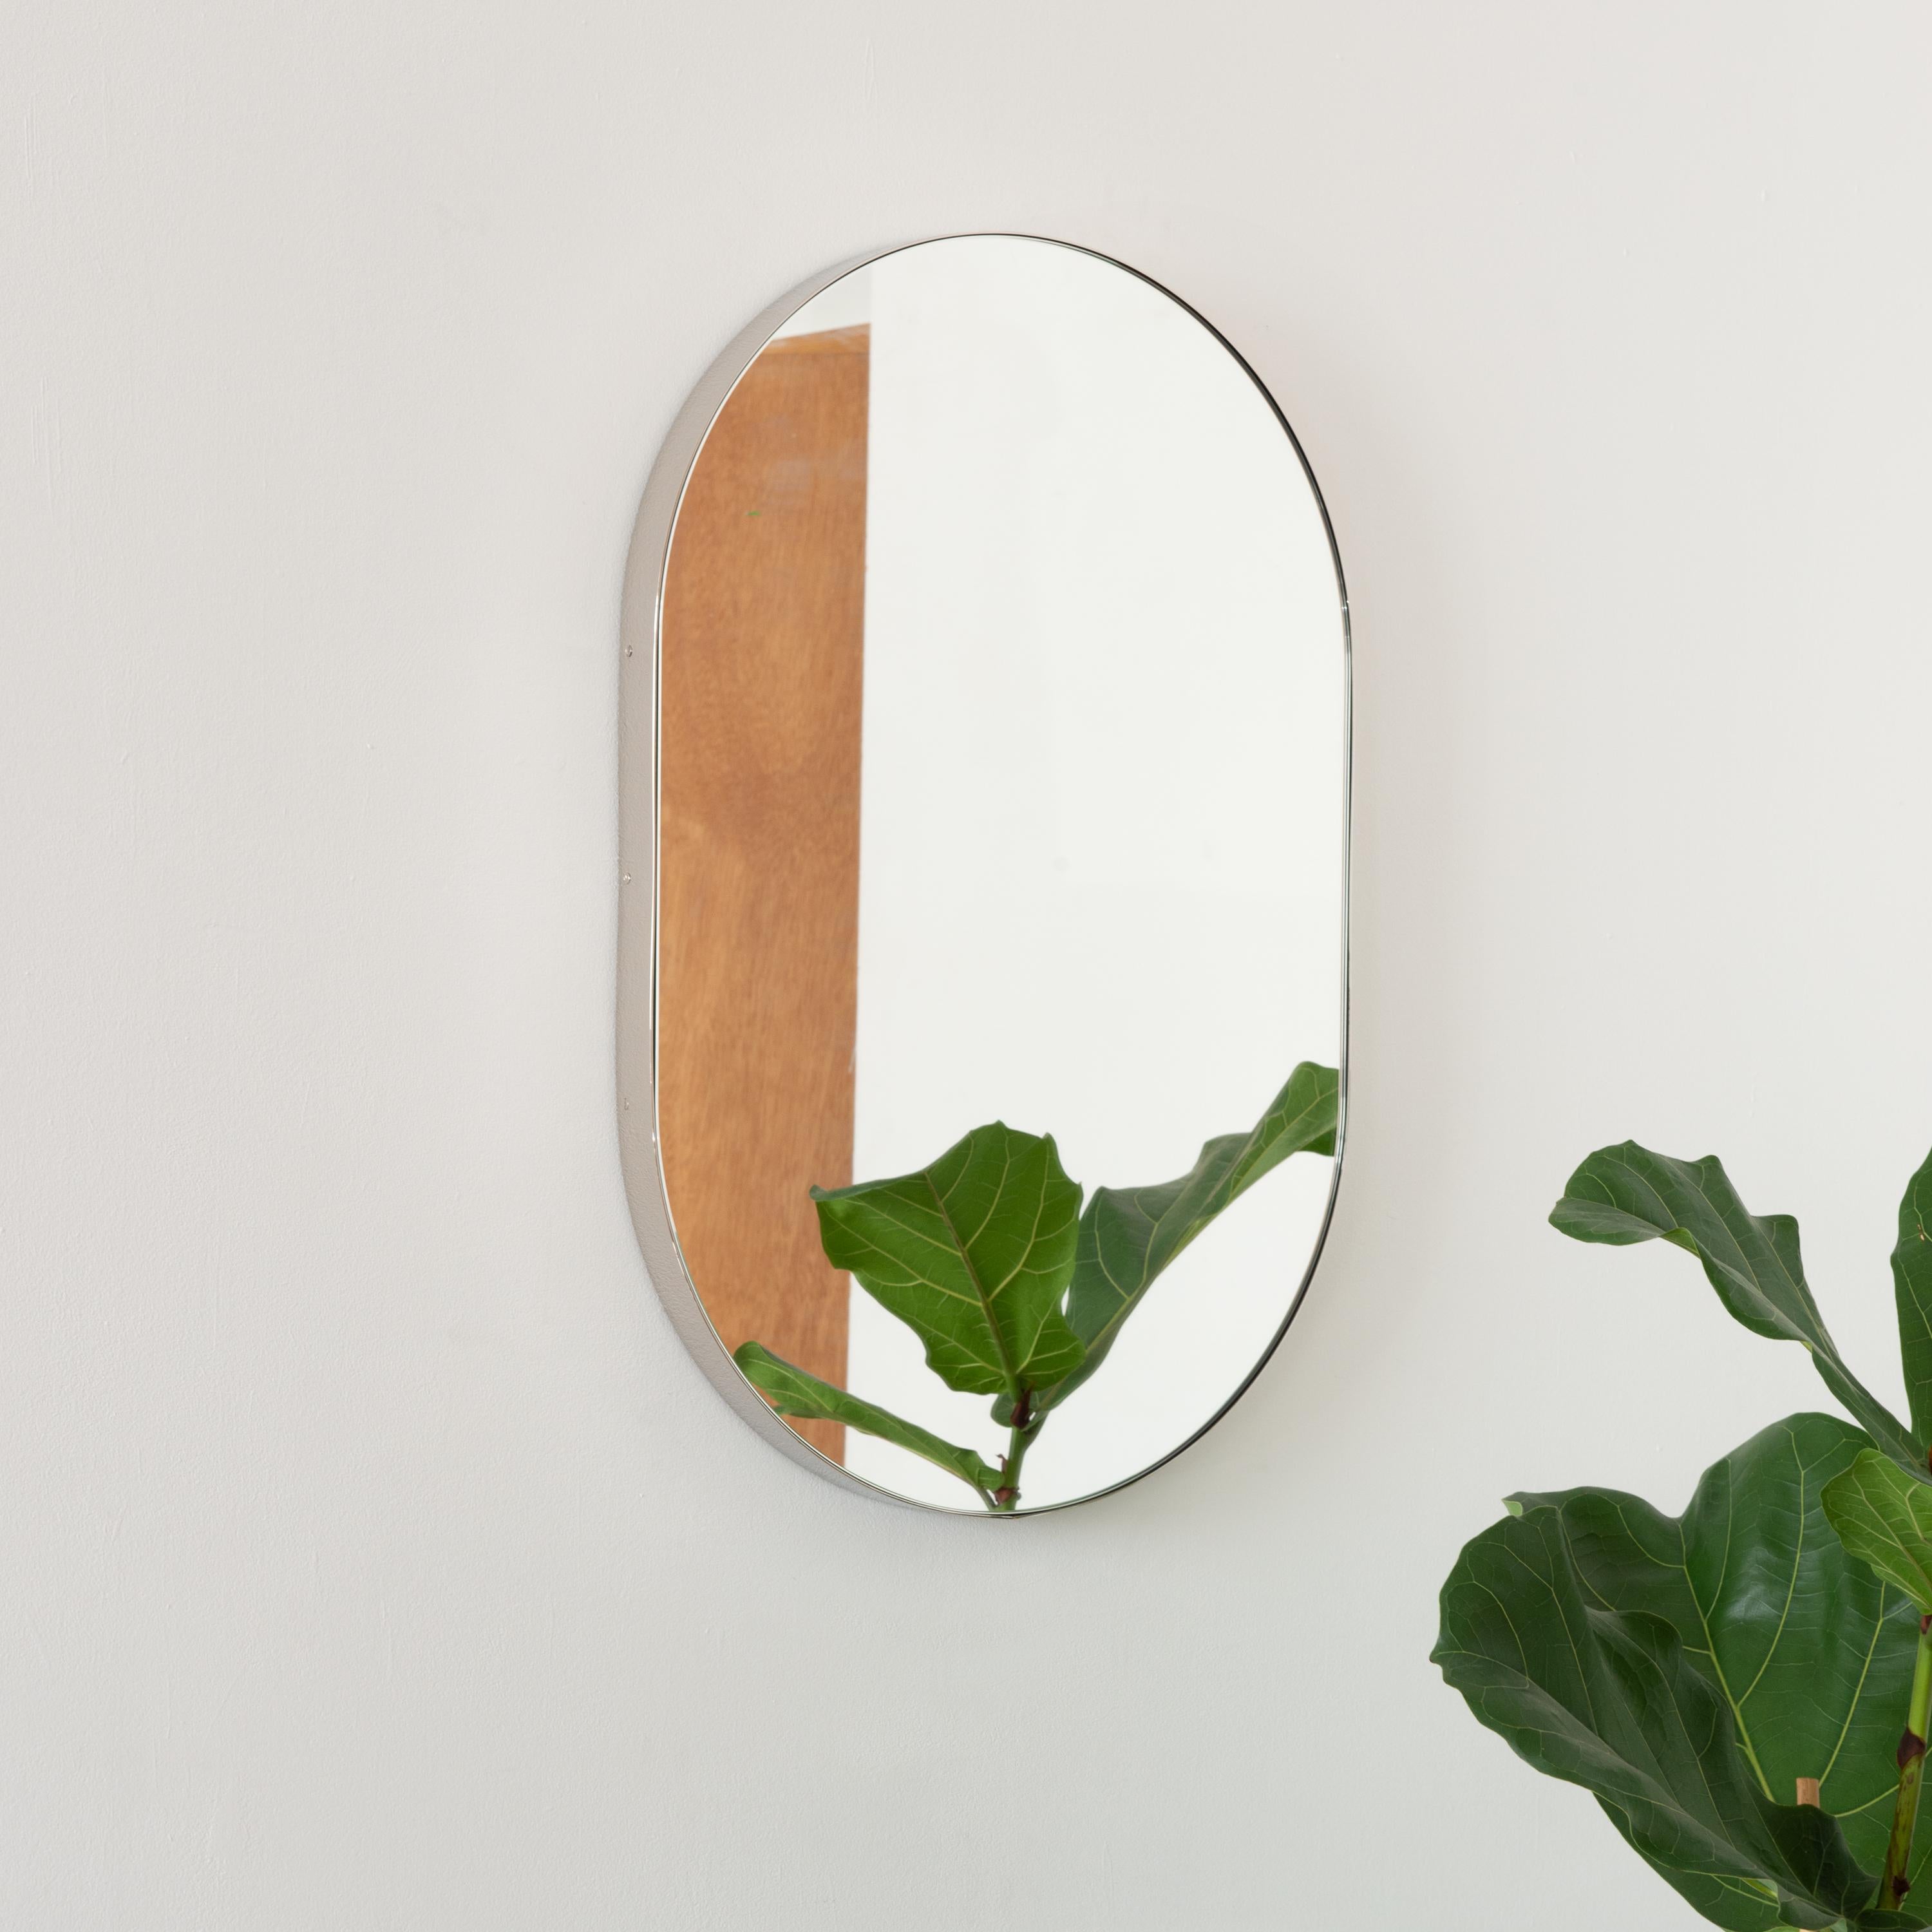 Delightful capsule shaped mirror with an elegant nickel plated frame. Designed and handcrafted in London, UK.

Medium, large and extra-large (37cm x 56cm, 46cm x 71cm and 48cm x 97cm) mirrors are fitted with an ingenious French cleat (split batten)